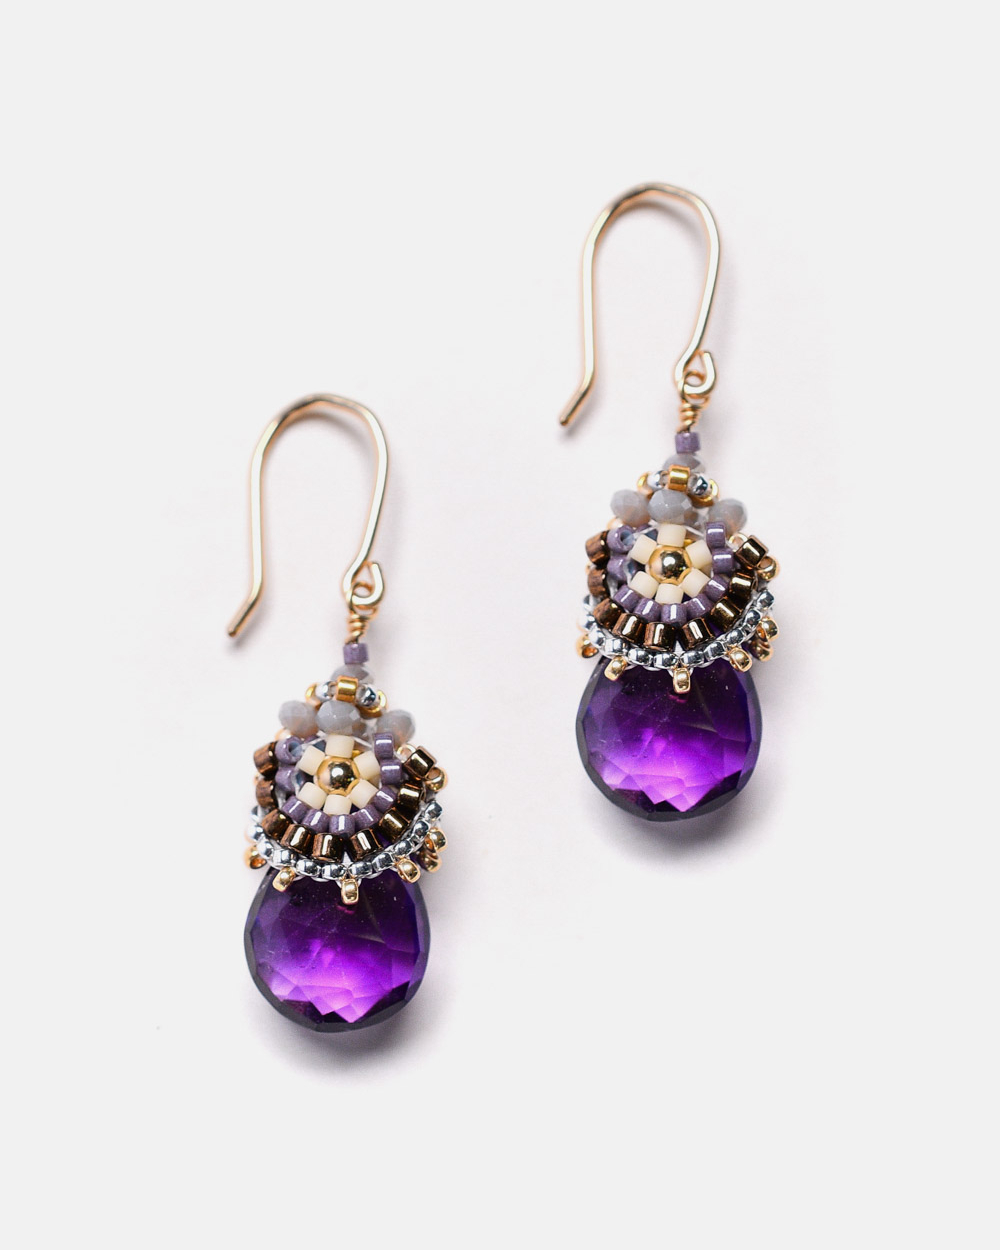 14k gold filled drop earrings with beads and semi-precious stones